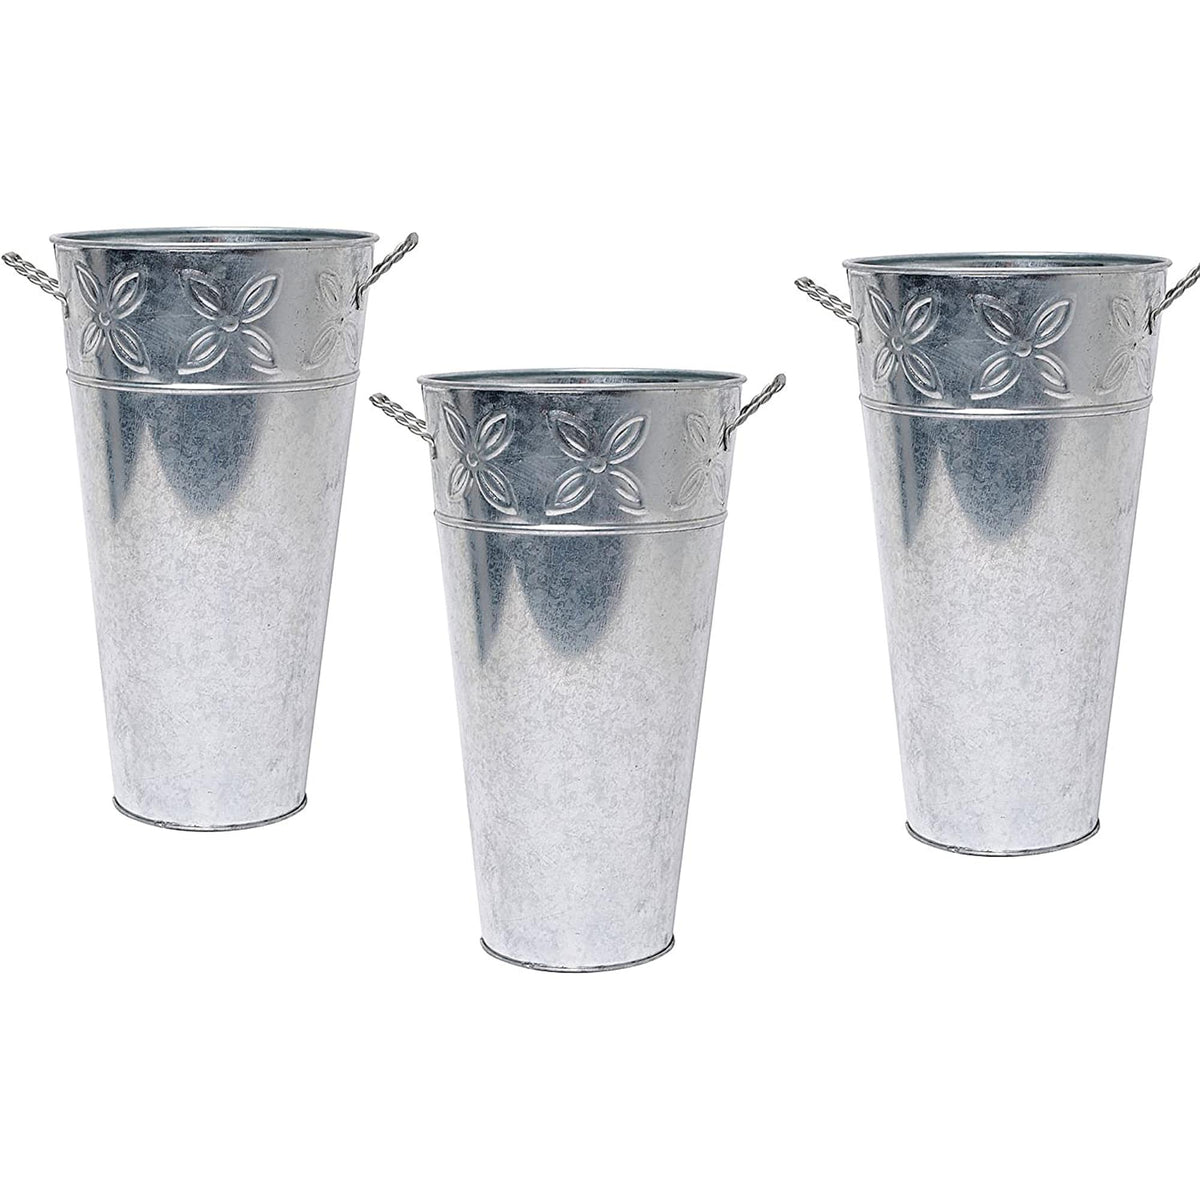 HOSLEY® Iron Galvanized Vases , Set of 3, 12 inches High each